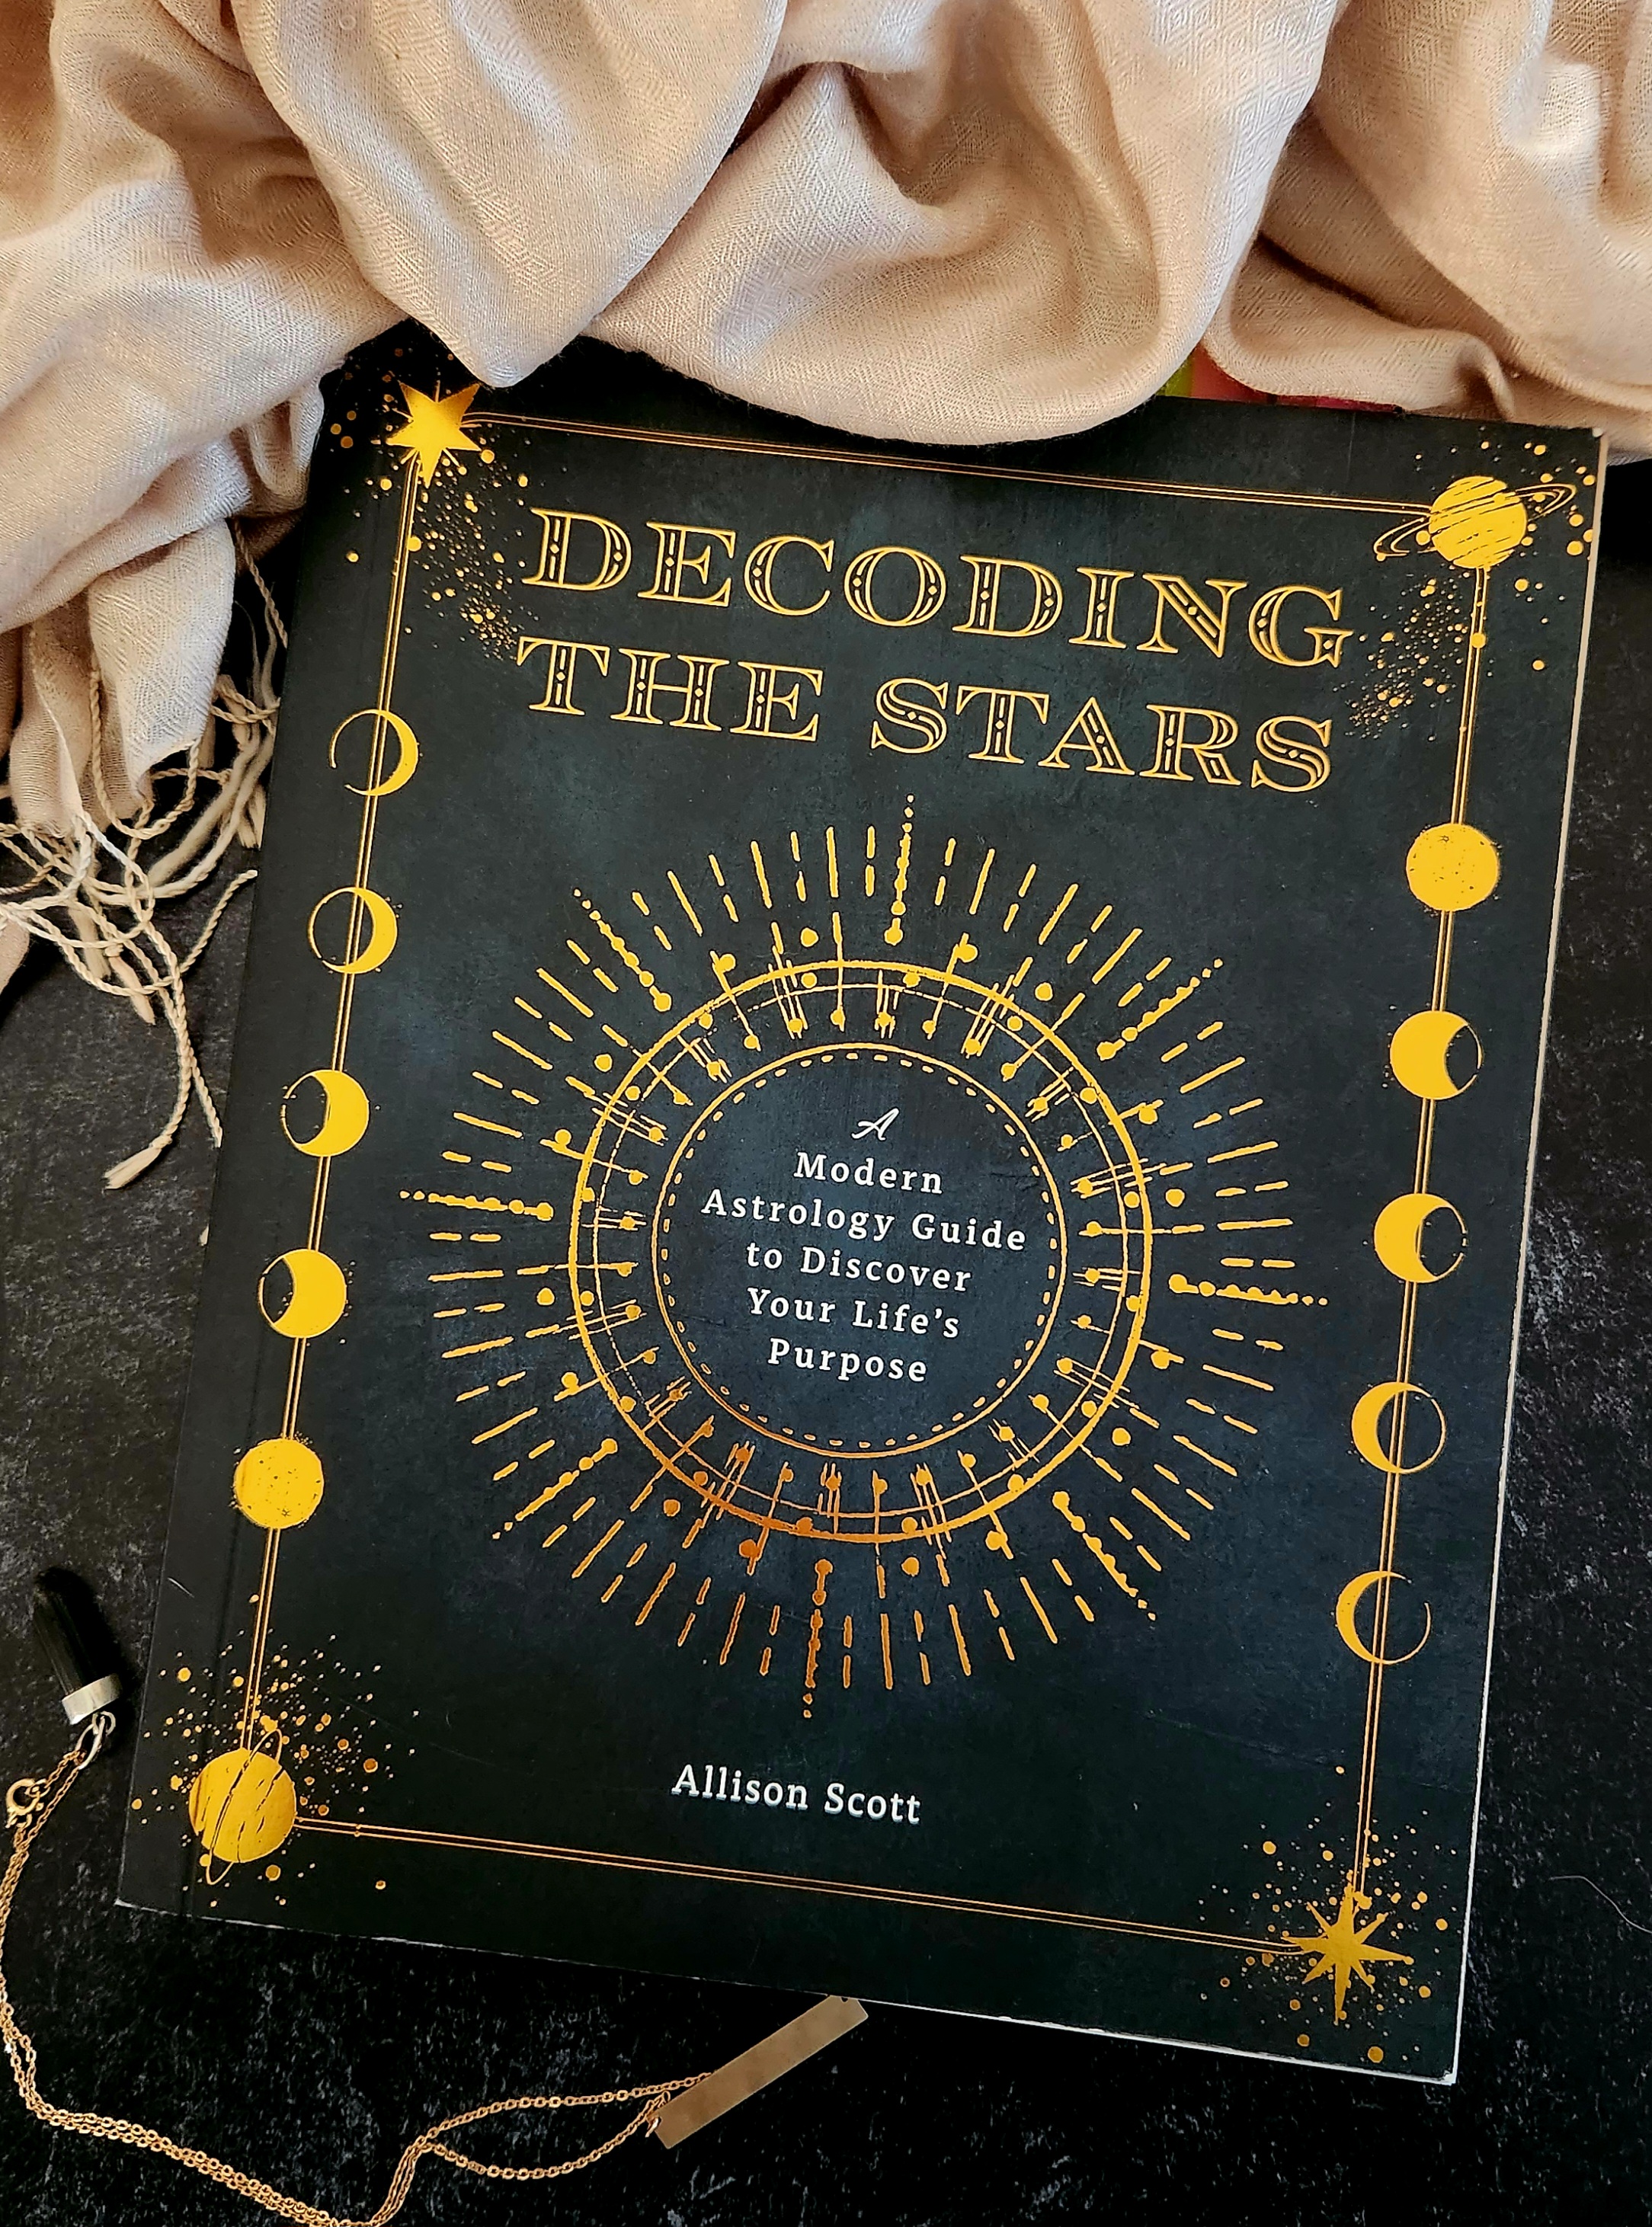 Book Review of DECODING THE STARS: A Modern Astrology Guide to Discover Your Life’s Purpose